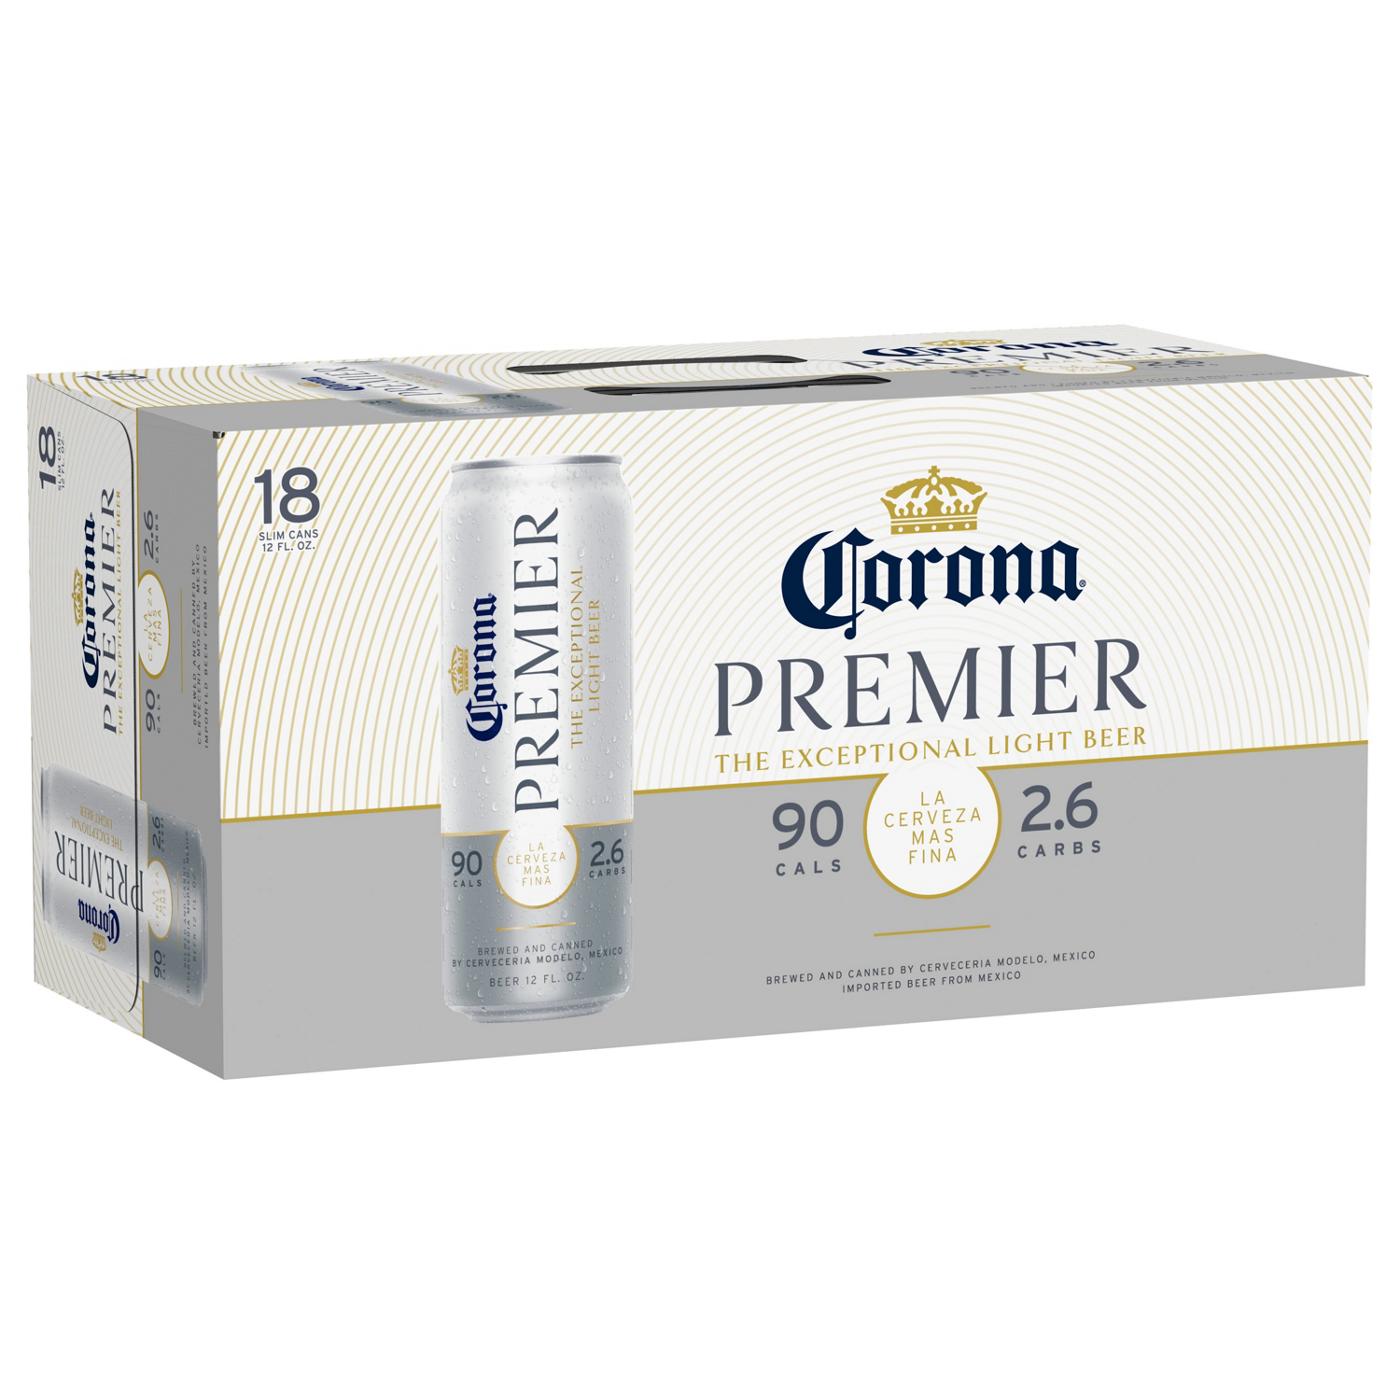 Corona Premier Mexican Lager Import Light Beer 12 oz Cans, 18 pk; image 1 of 4